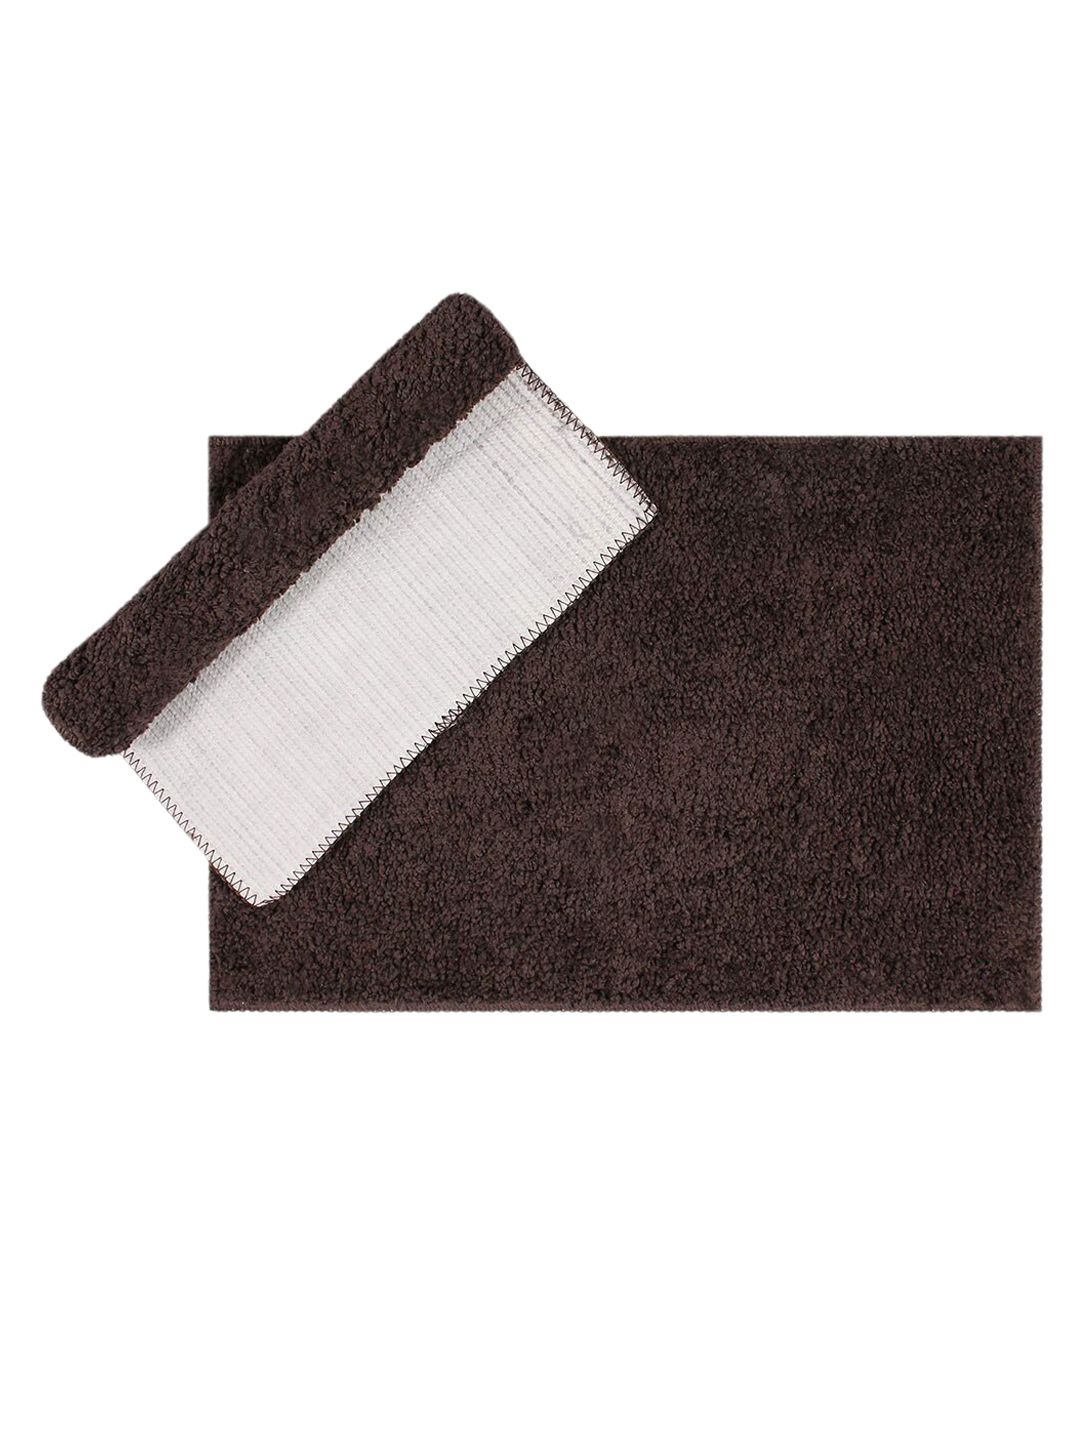 LUXEHOME INTERNATIONAL Brown Solid Bath Rug Price in India